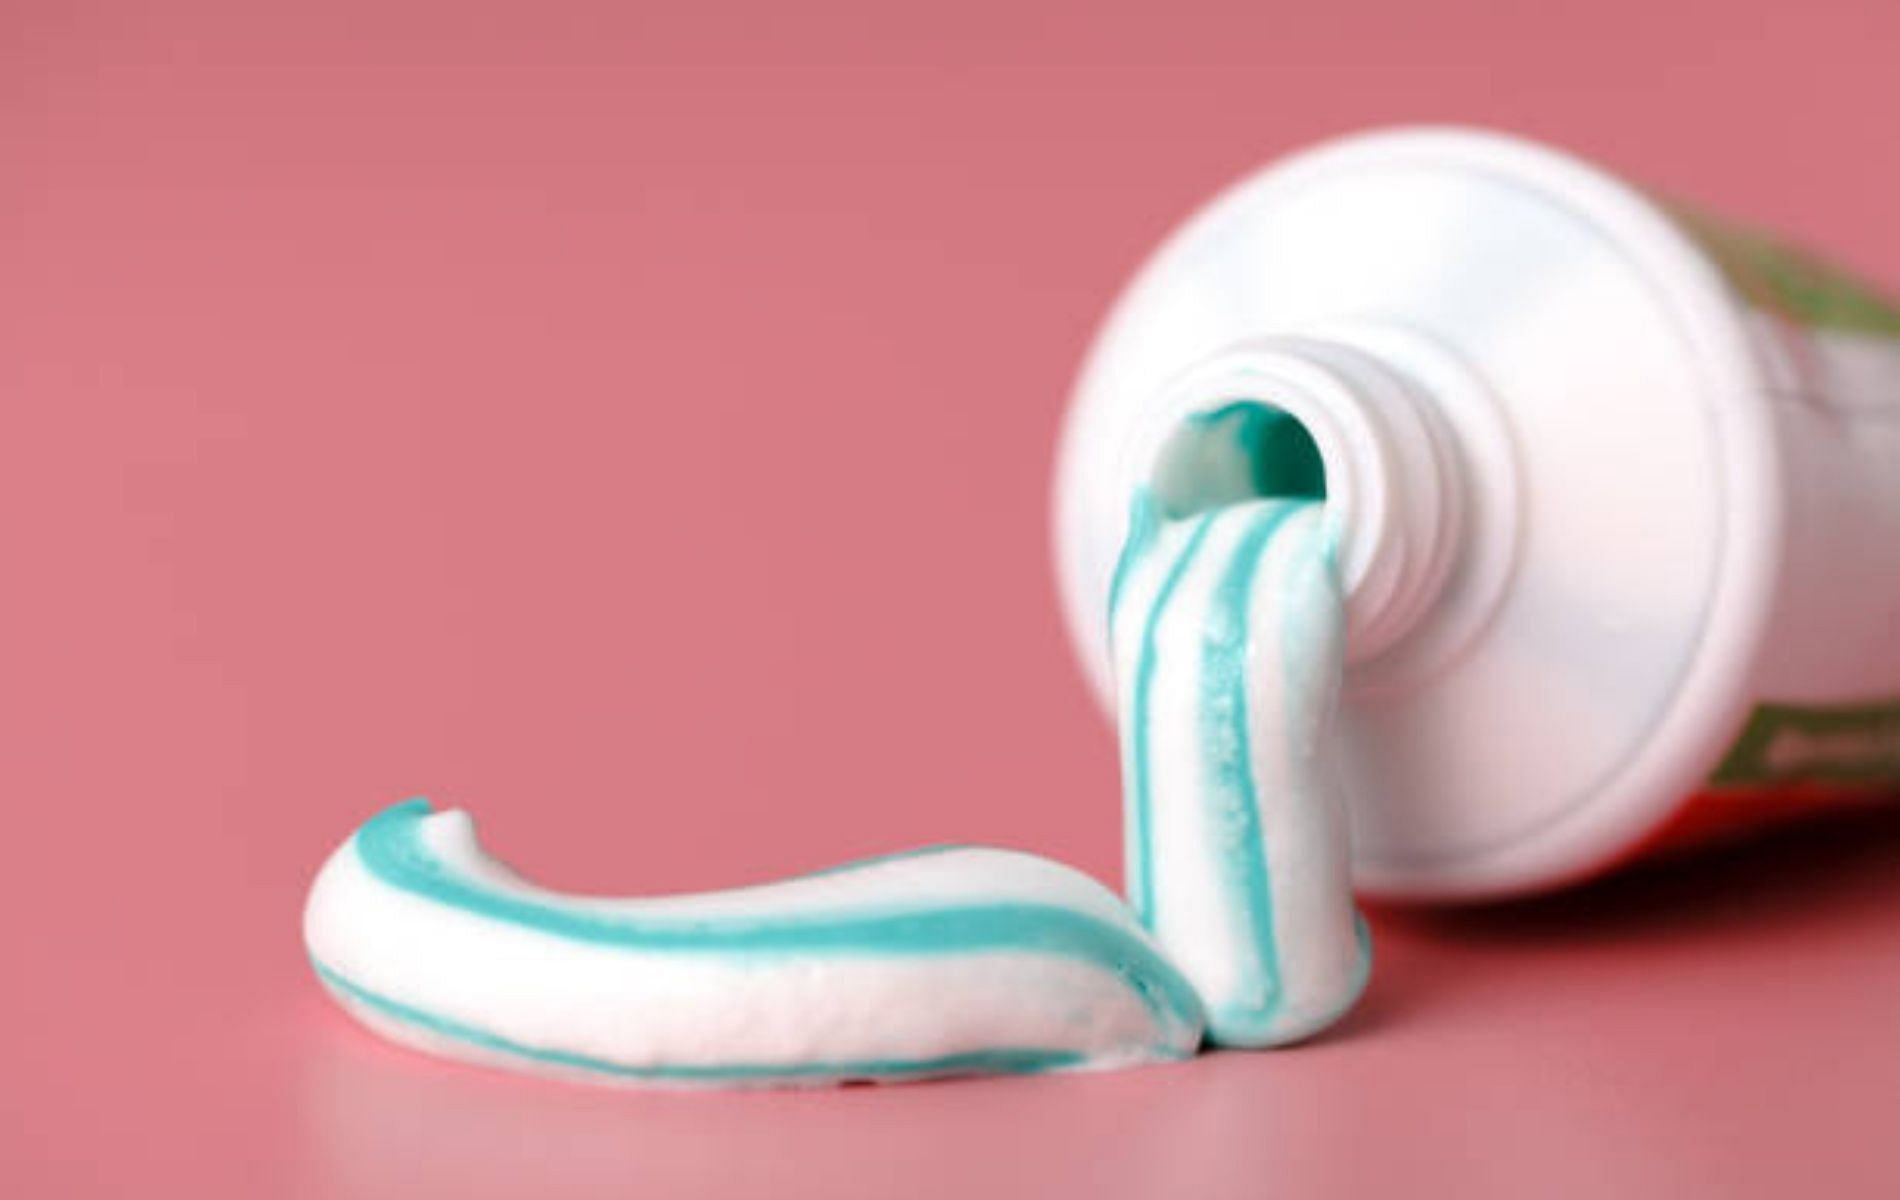 certain chemicals in oral hygiene products can cause the mucosa to peel. (Image by iStockphoto via Pexels)